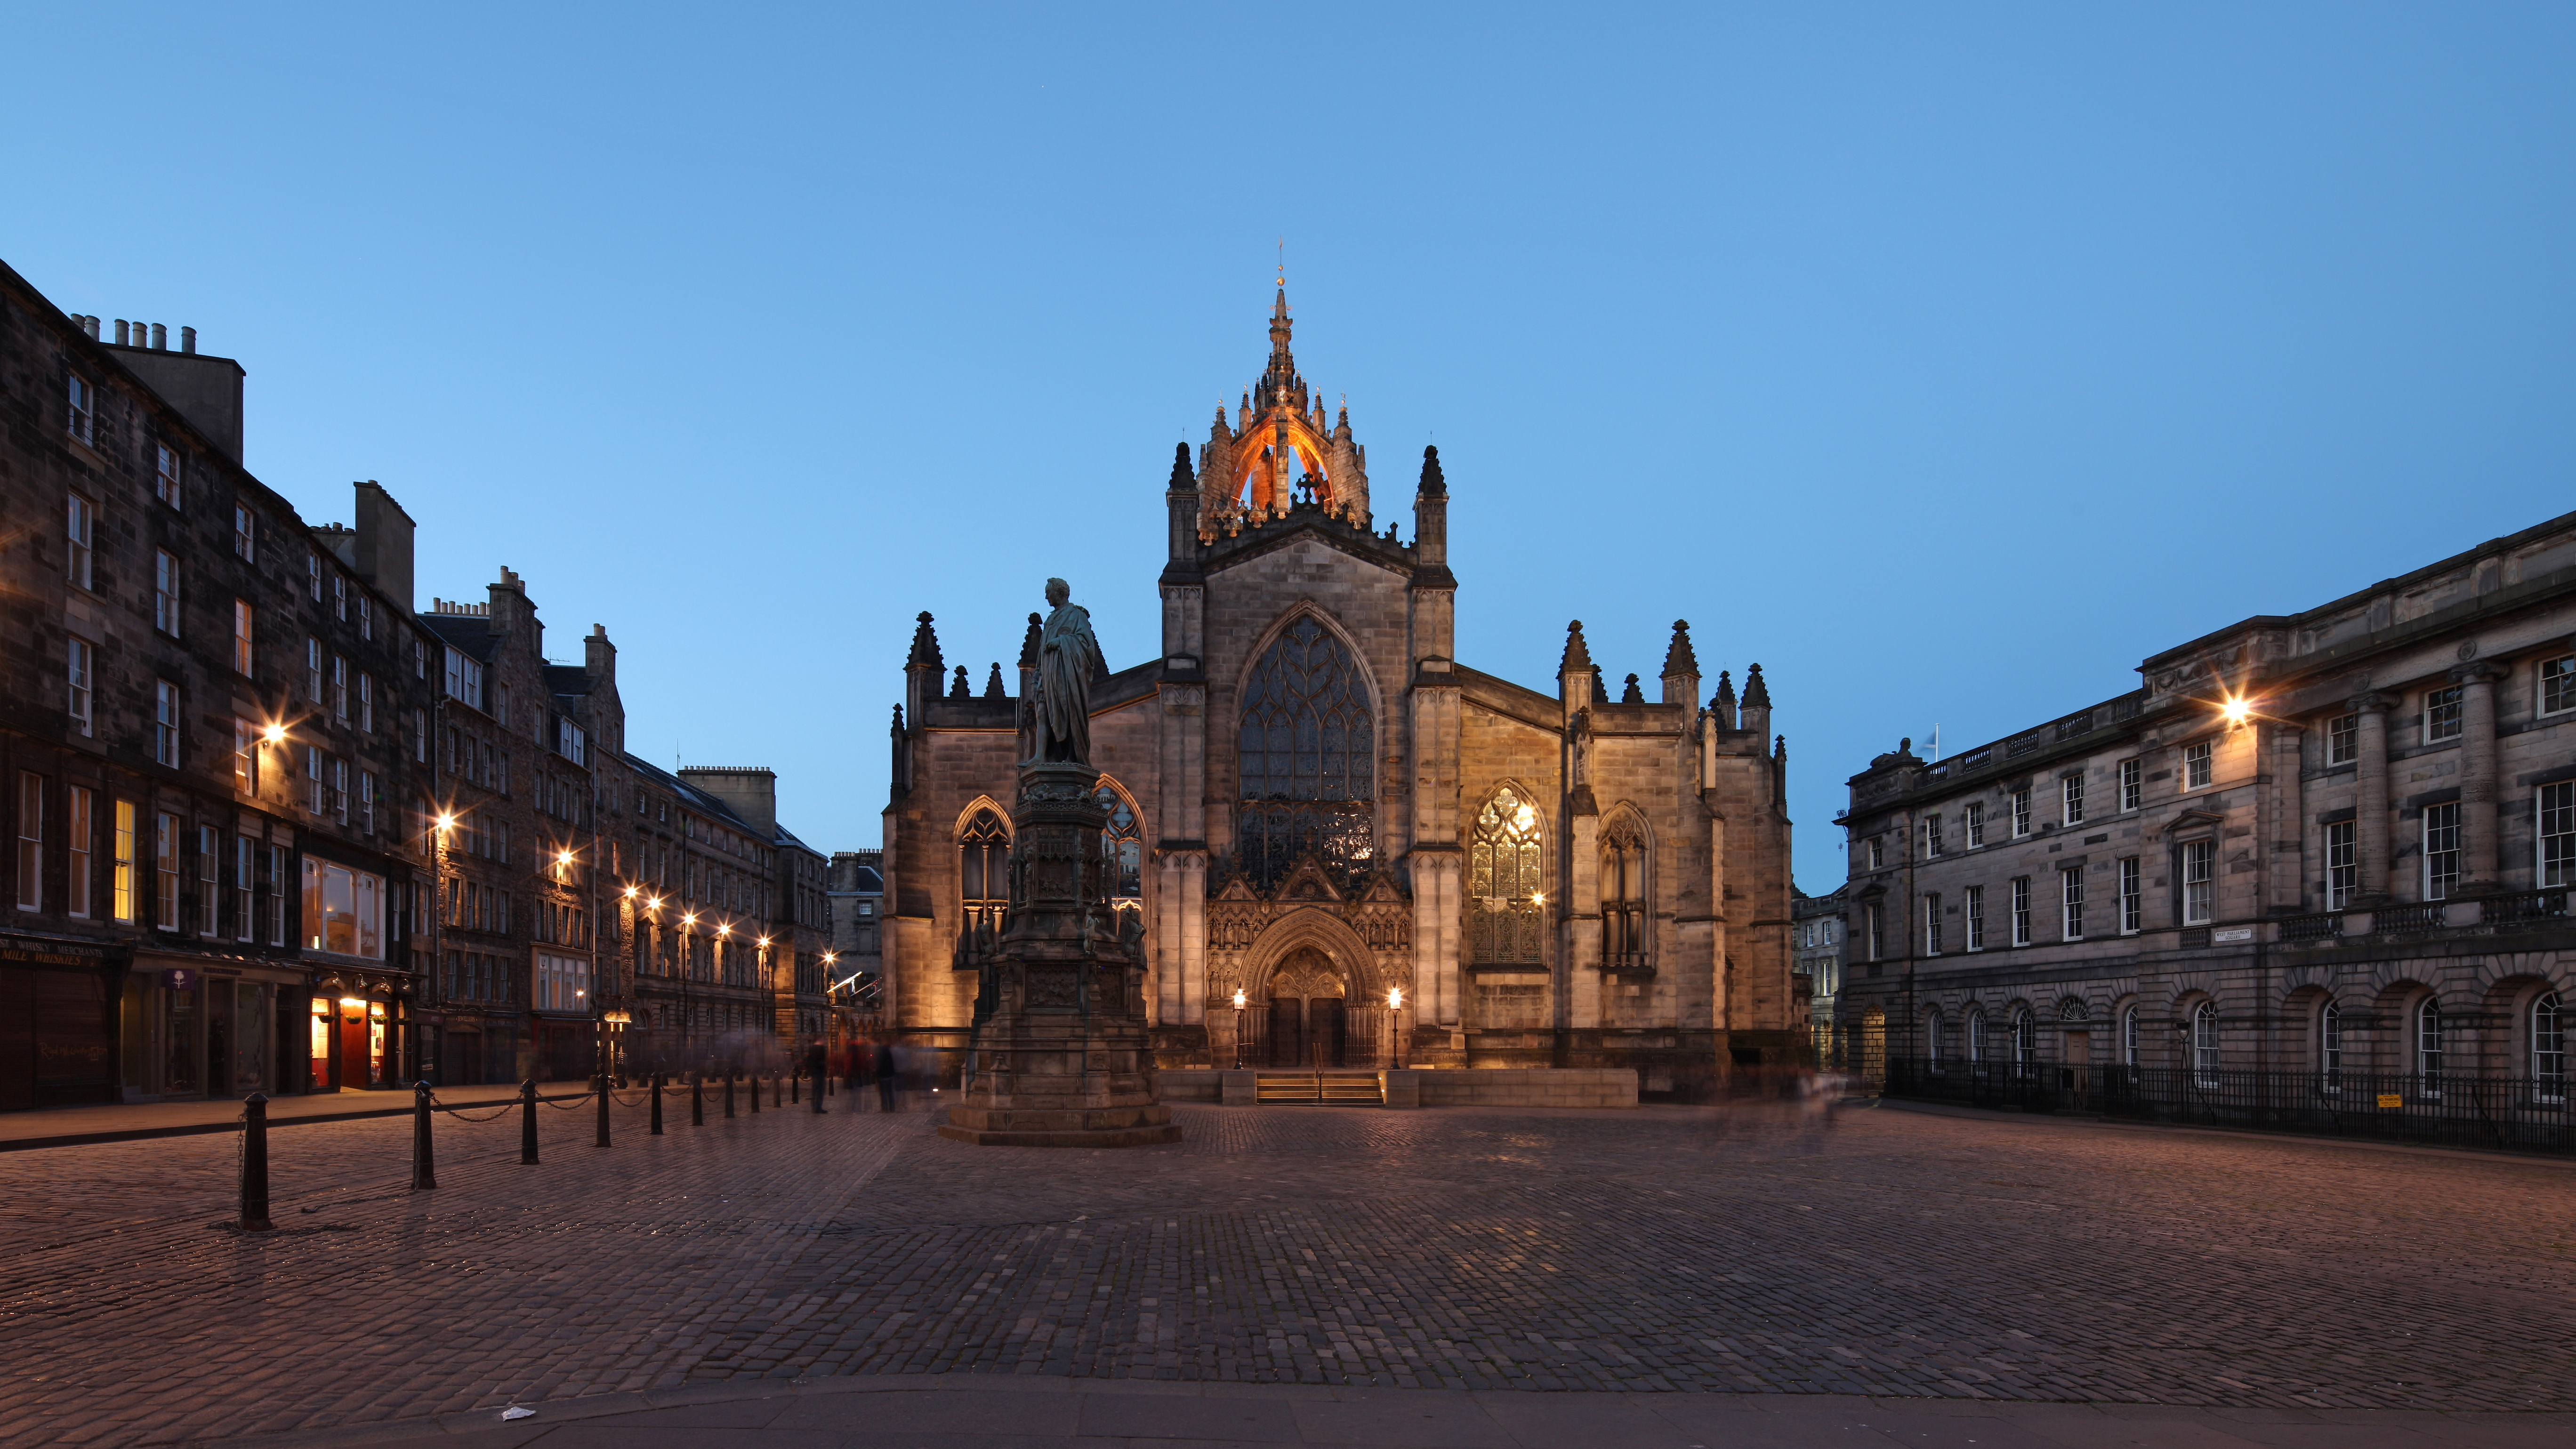 St Giles' Cathedral, more properly termed the High Kirk of Edinburgh, is the principal place of worship of the Church of Scotland in Edinburgh.